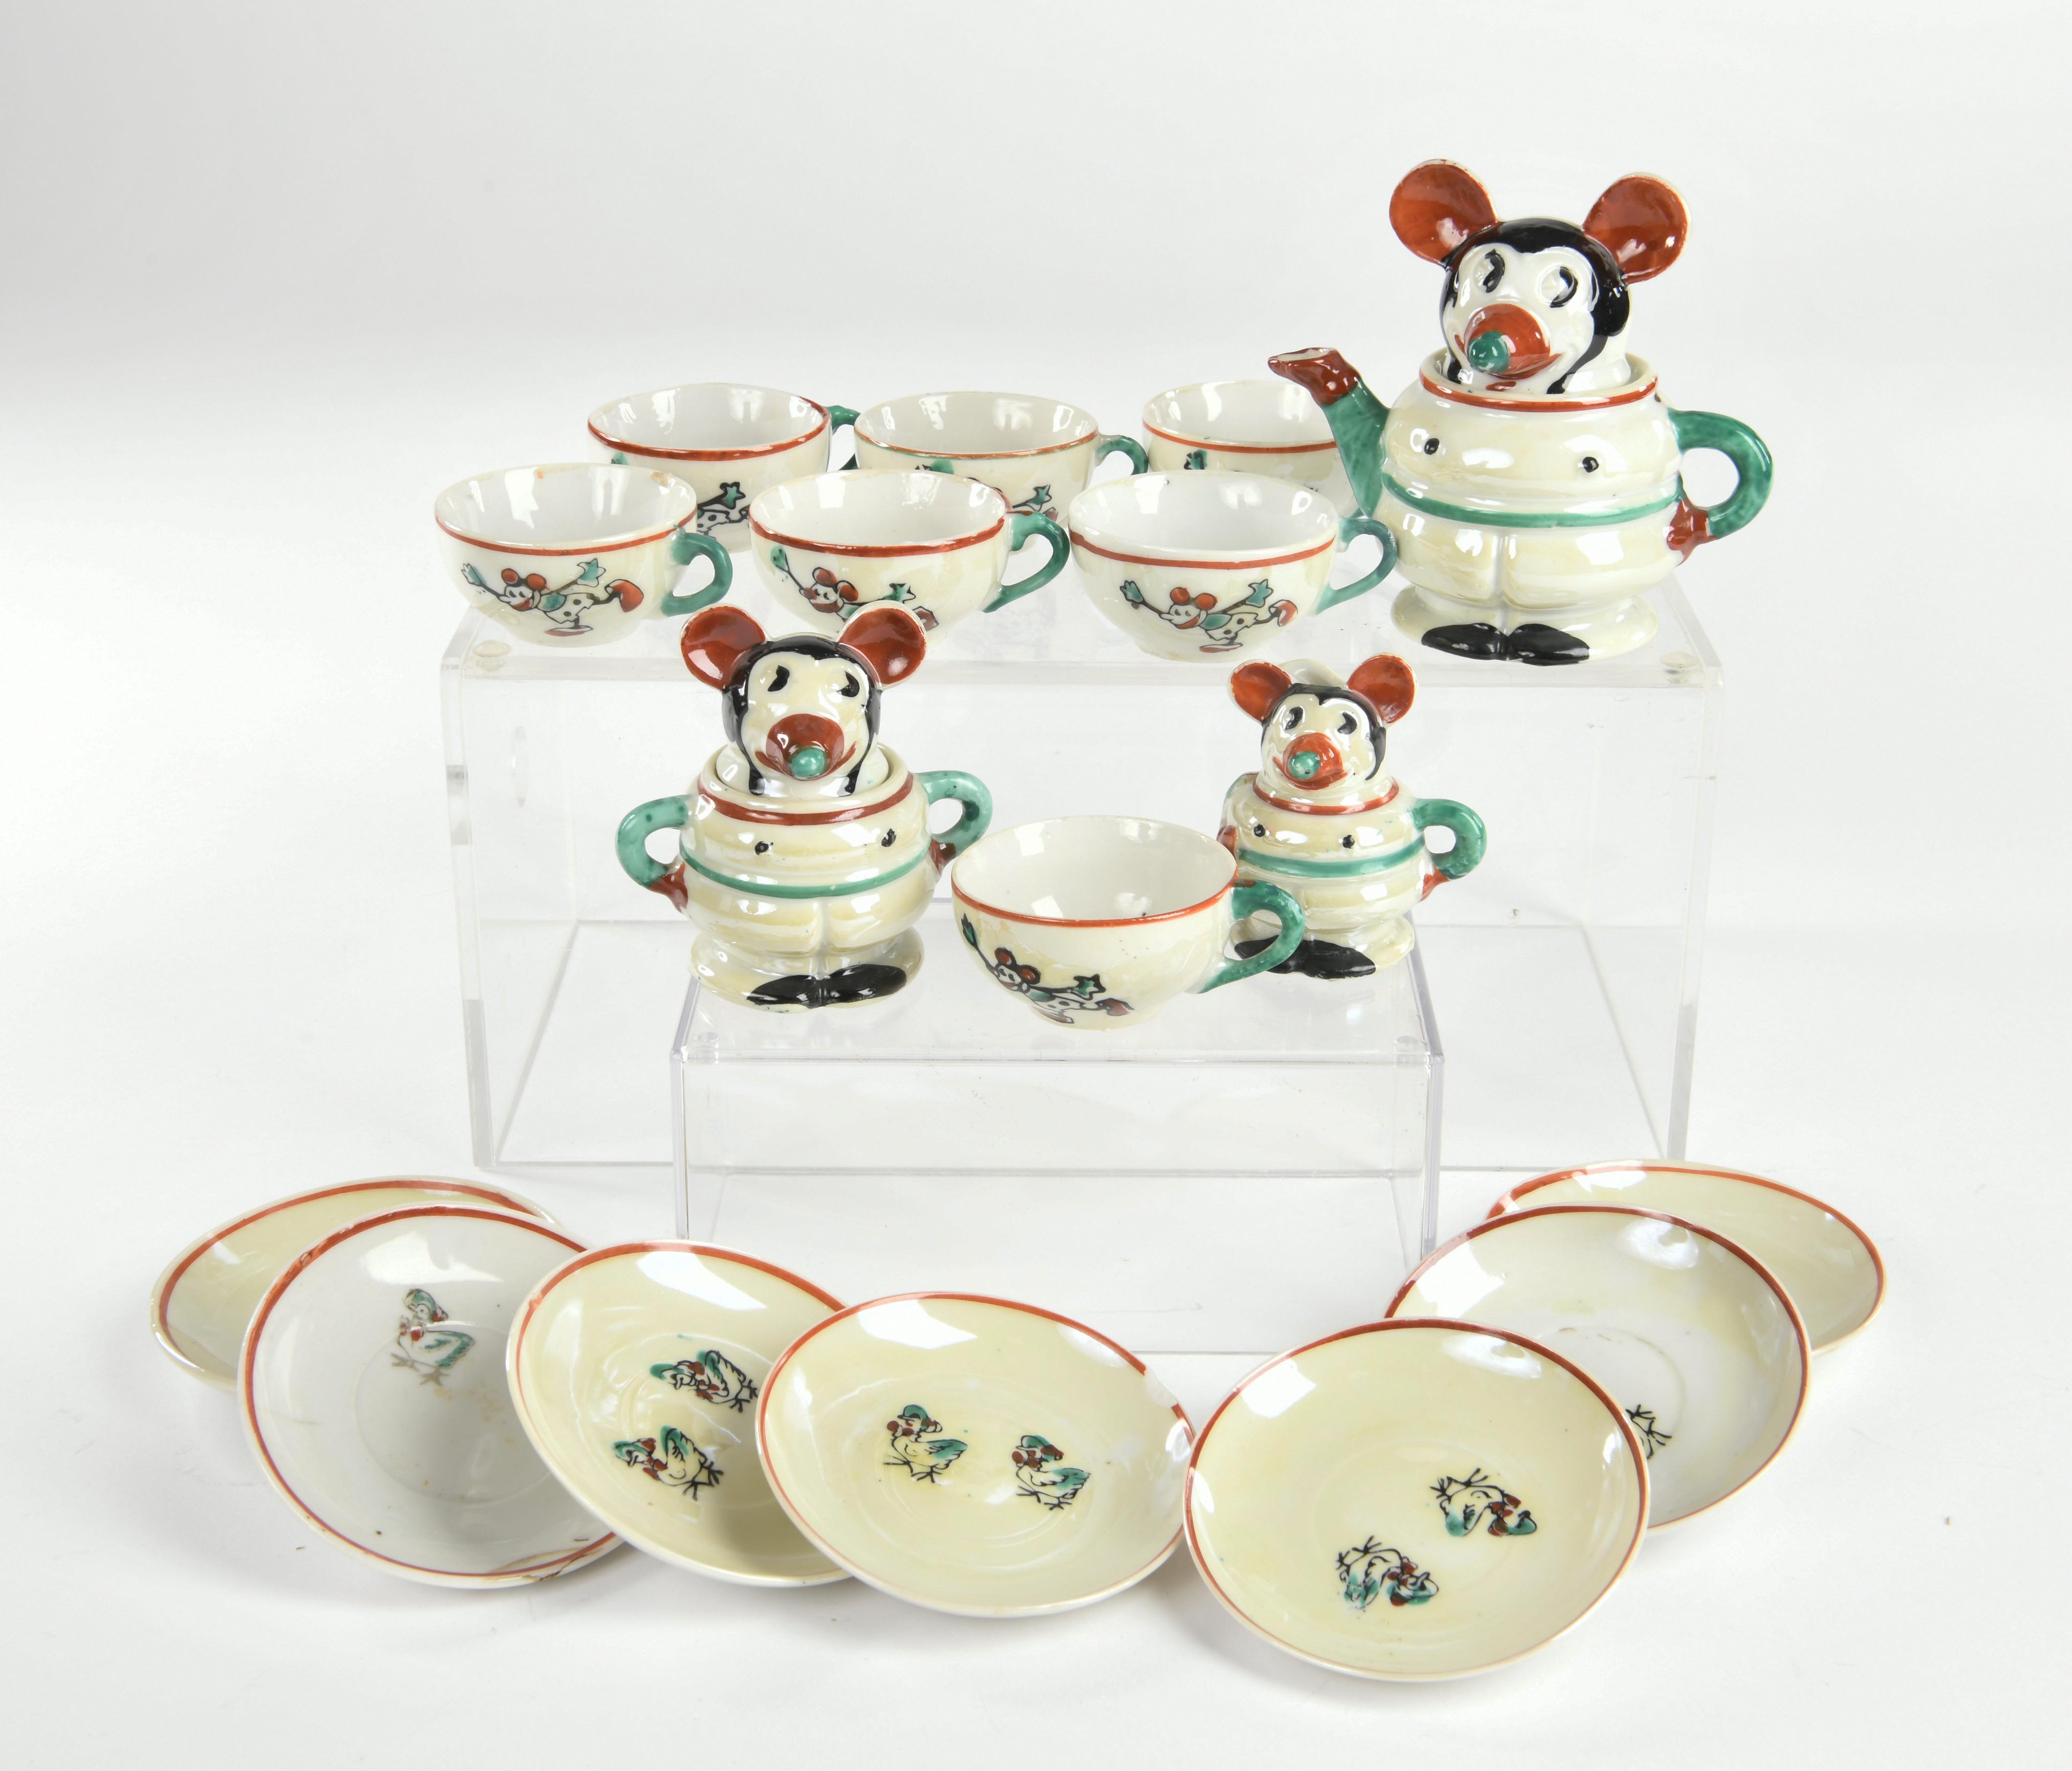 Mickey Mouse tableware, pot 10 cm, 7 cups, saucers, 2 jugs + 1 sugar bowl, traces of use and age